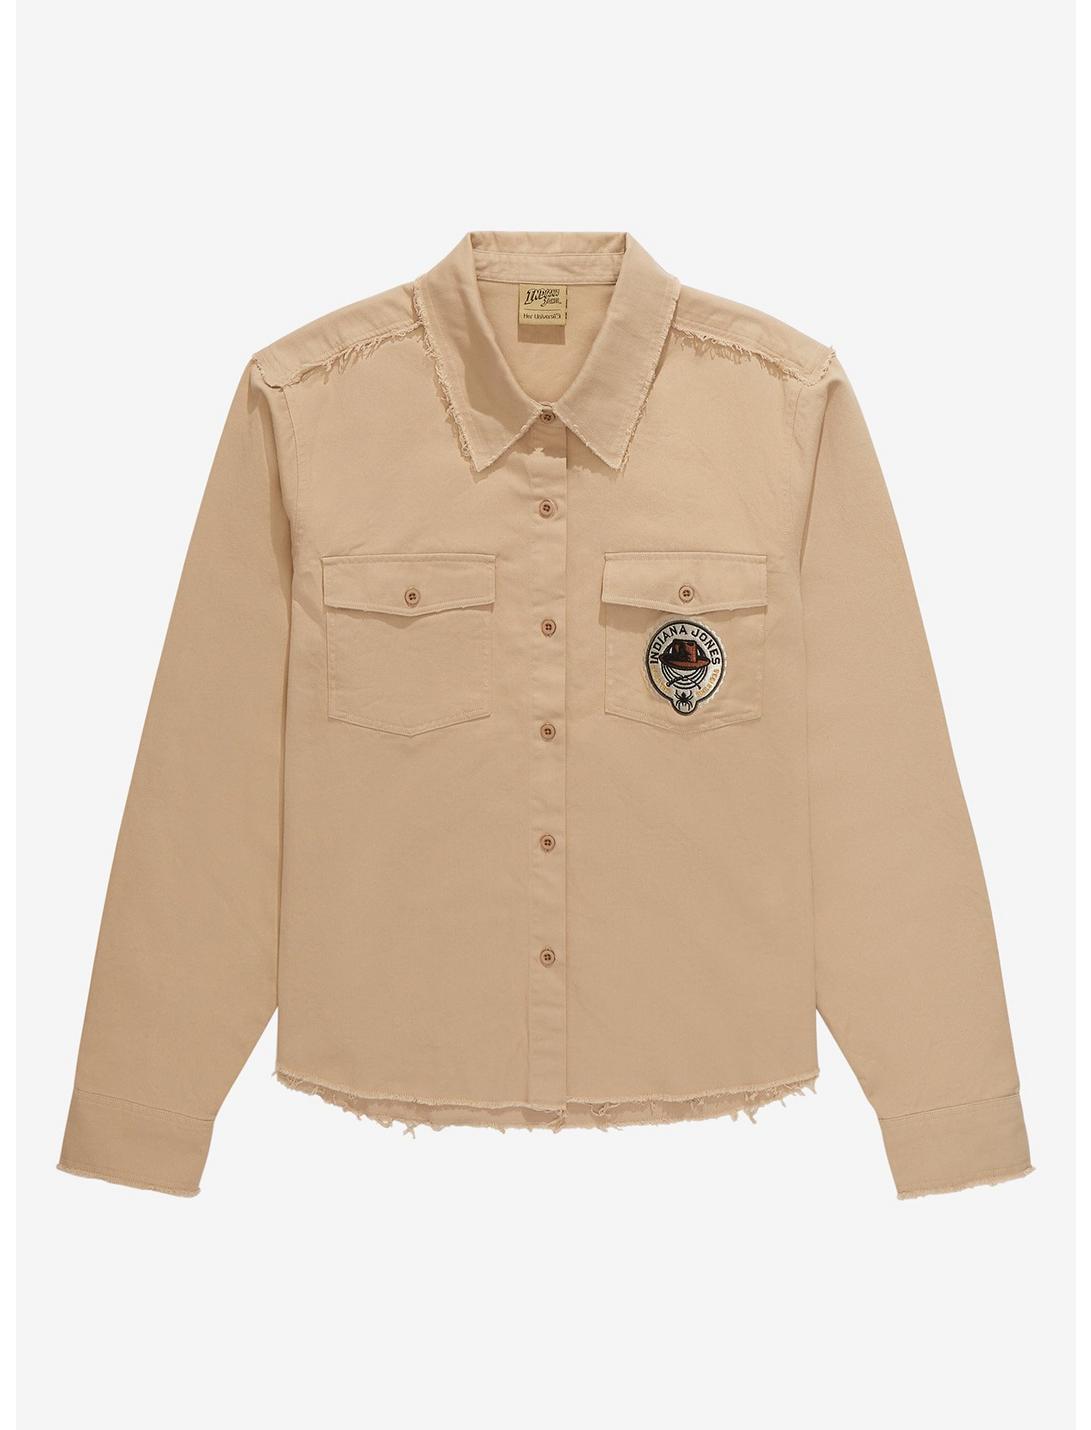 Our Universe Indiana Jones Patch Utility Overshirt - BoxLunch Exclusive, TANBEIGE, hi-res